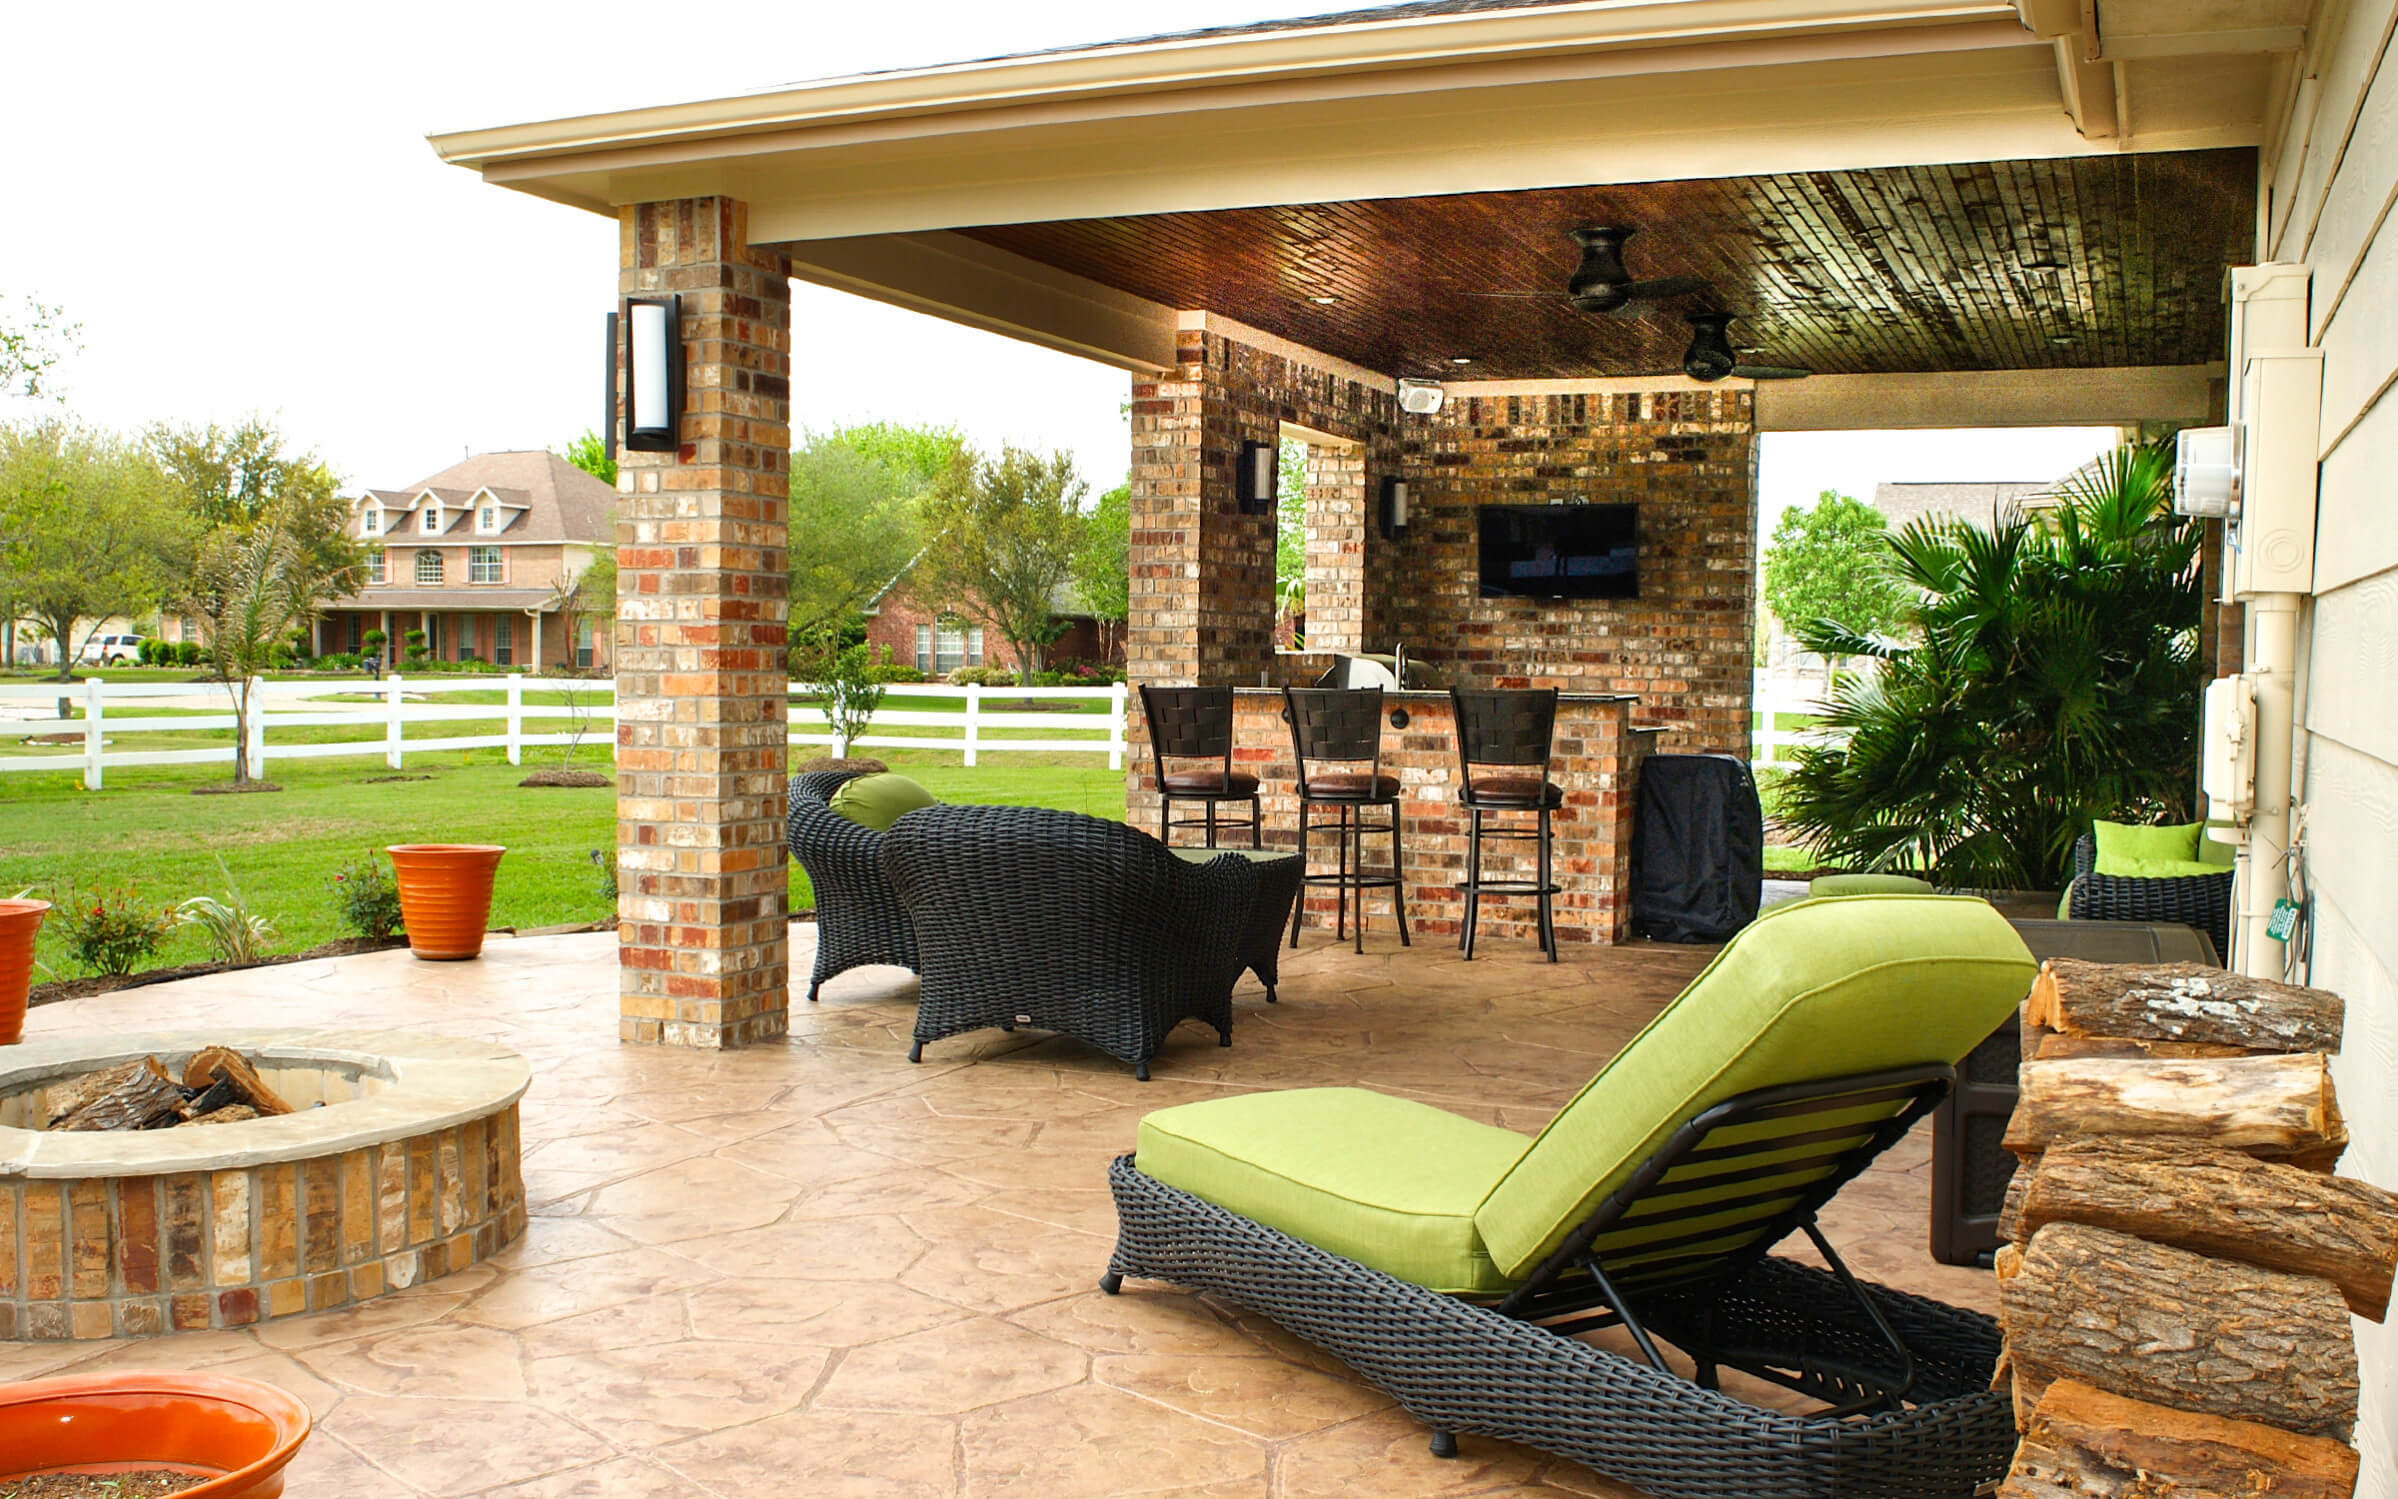 Outdoor Kitchen Patio
 Patio Cover & Outdoor Kitchen in Pearland Estates Texas